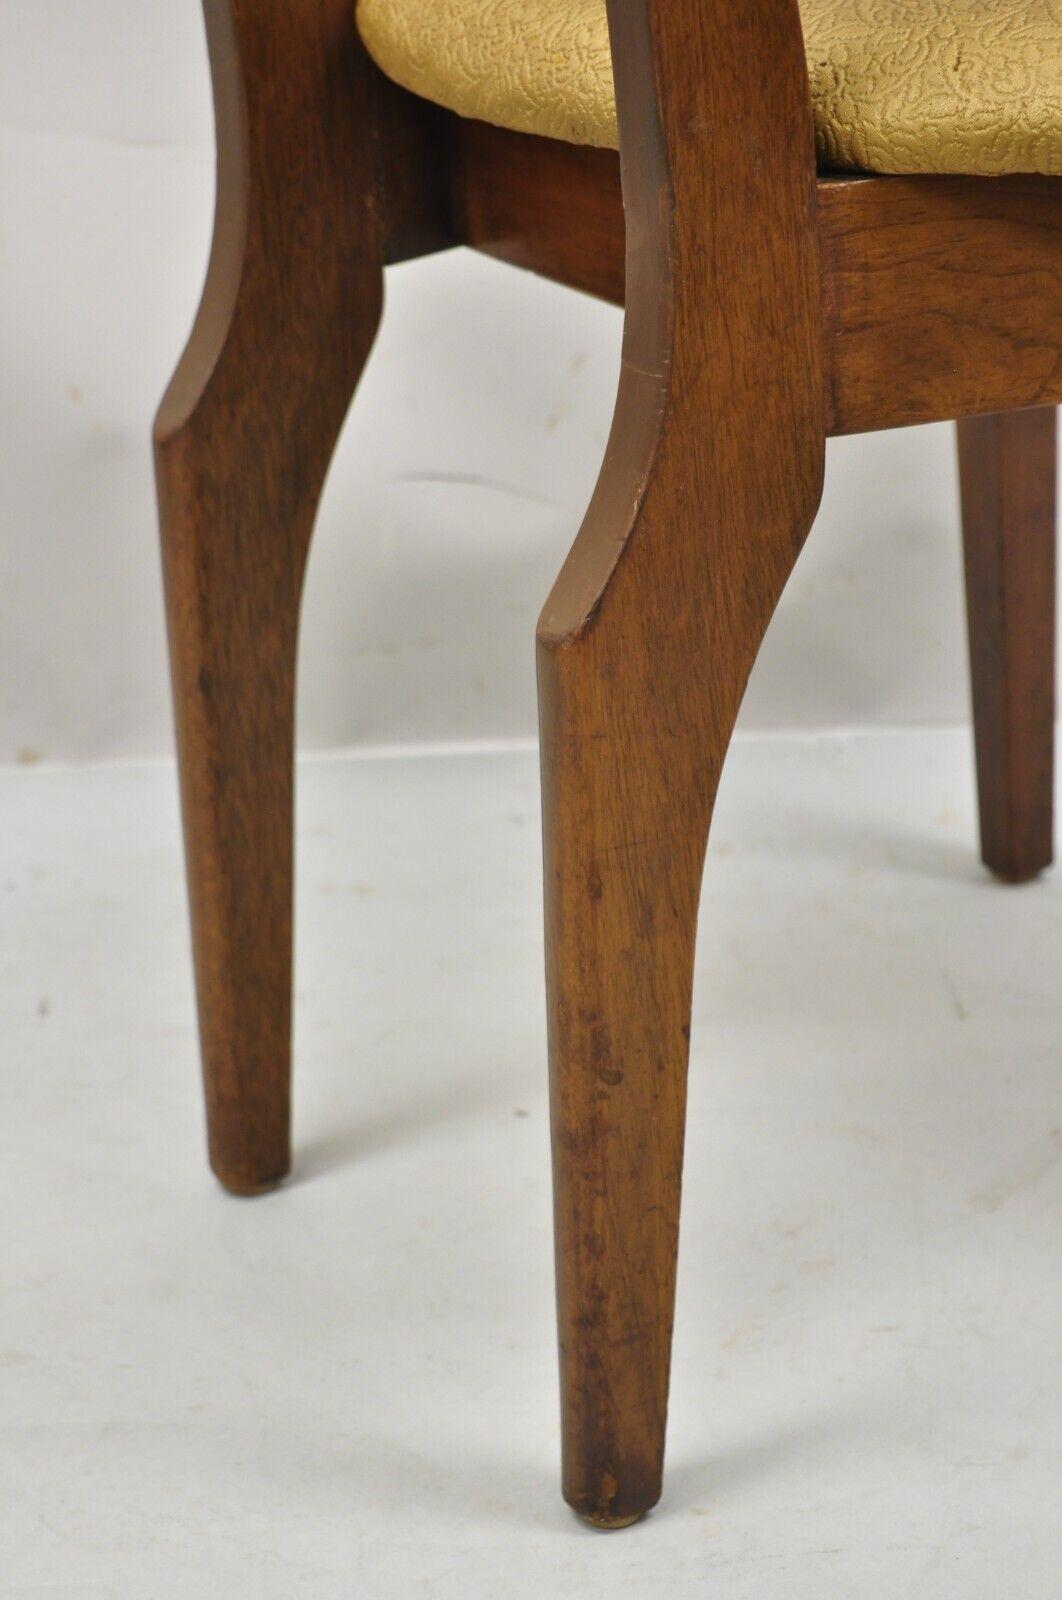 20th Century Mid-Century Modern Cherry Wood Curved Back Hoof Leg Dining Side Chair For Sale